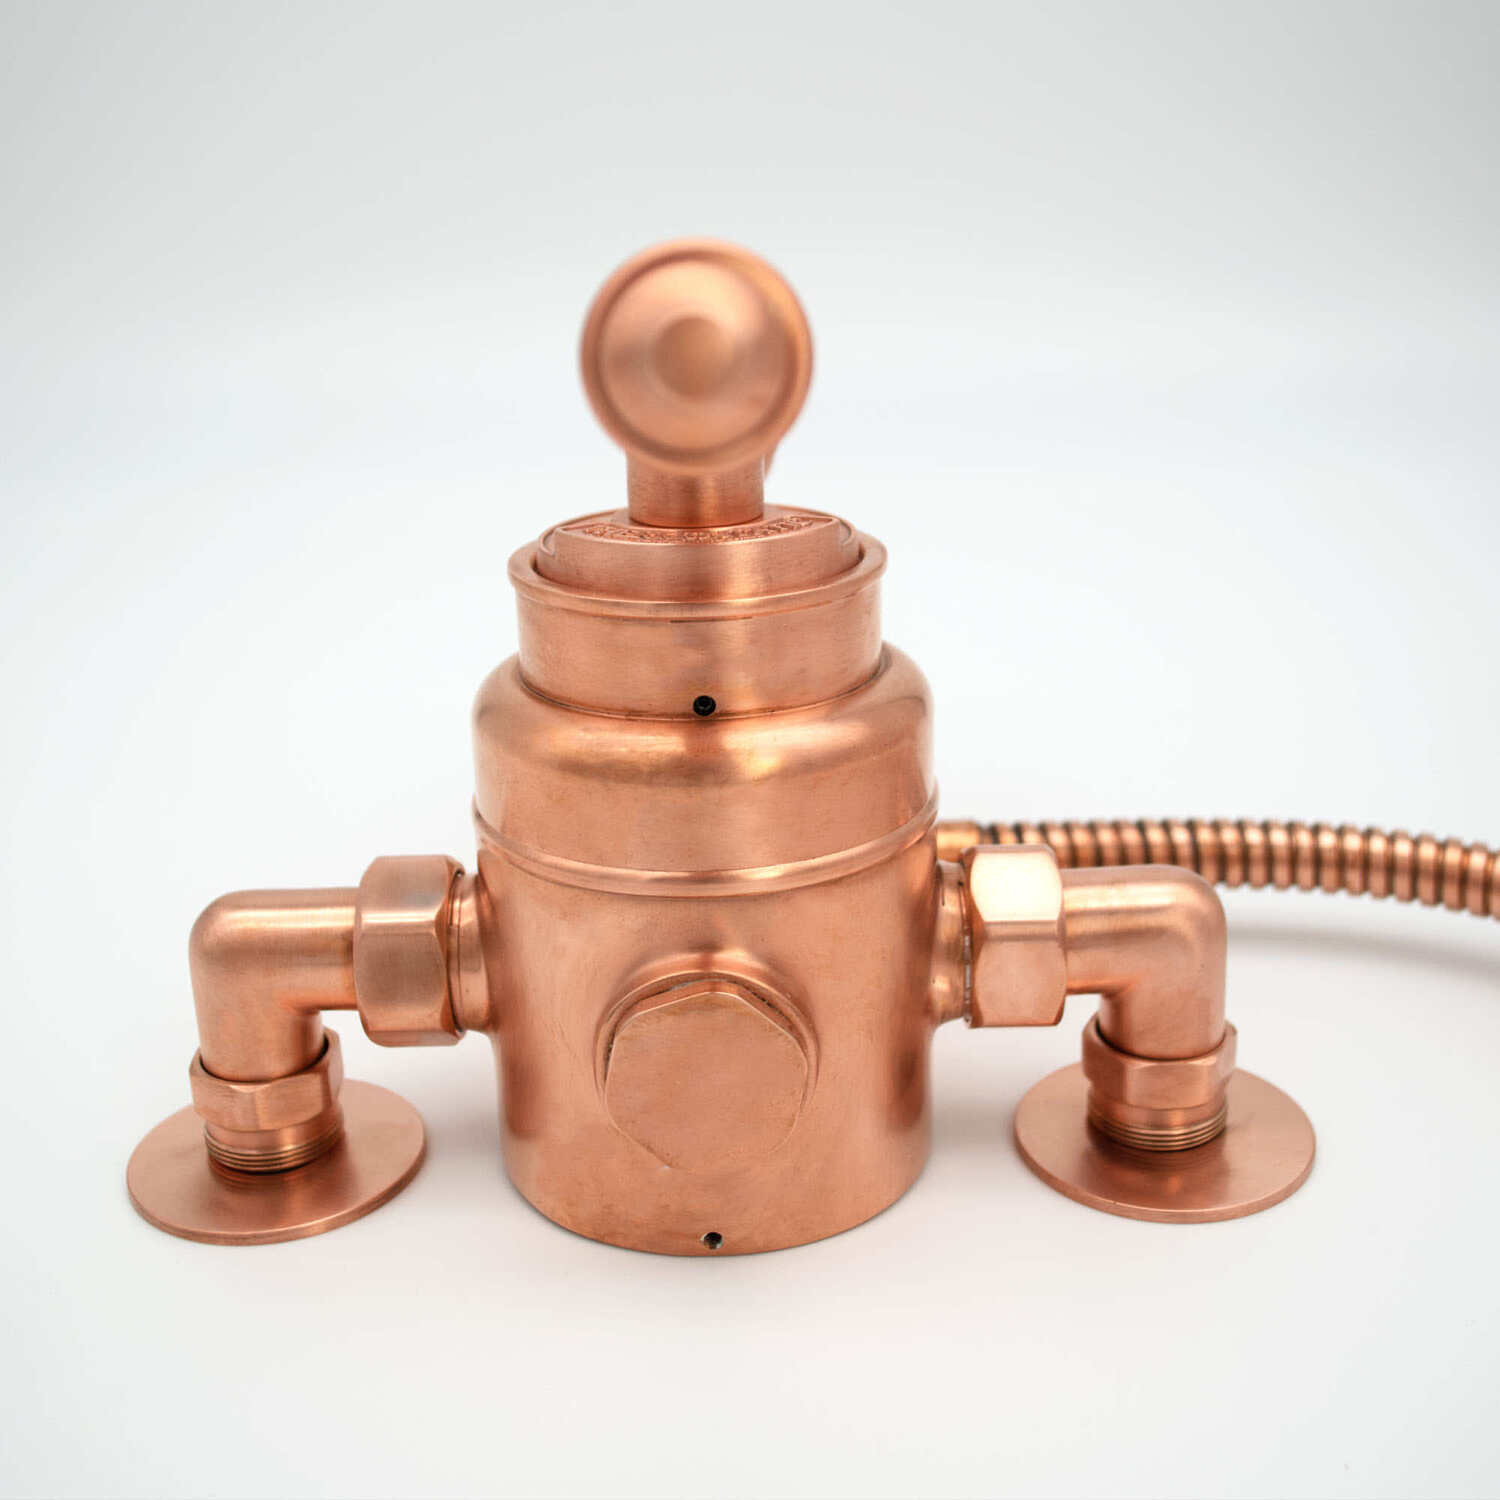 Copper thermostatic valve with easy-to-use temperature adjustment copper handle - underside photo